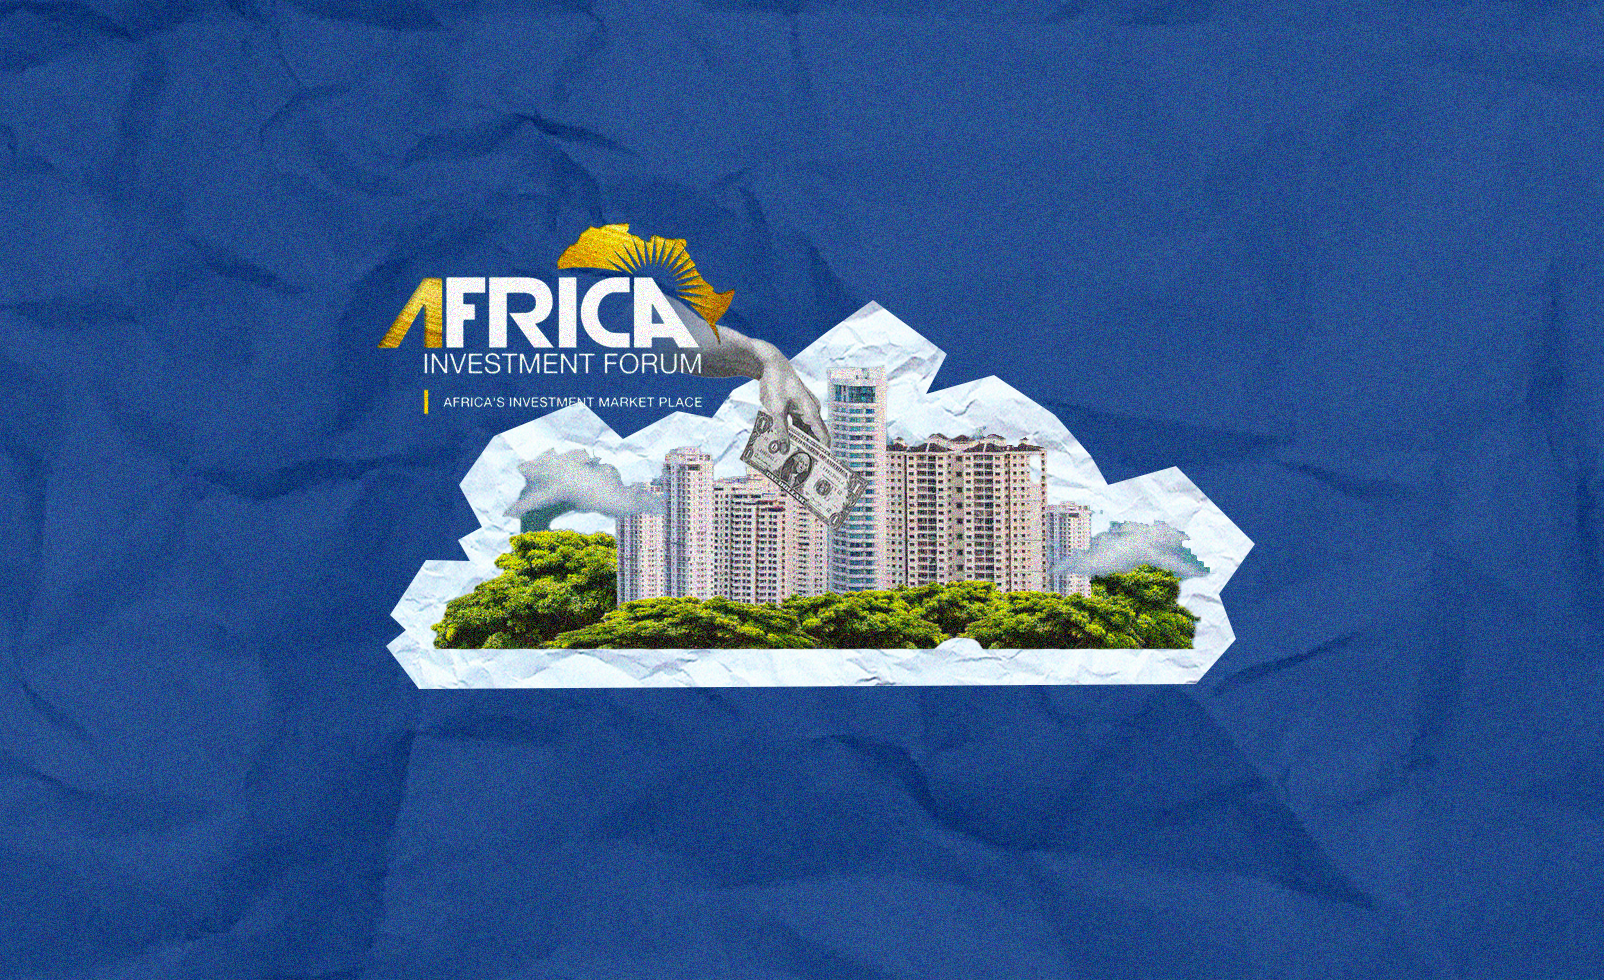 What are the Real Estate and Infrastructure Projects That Were Funded at The Africa Investment Forum